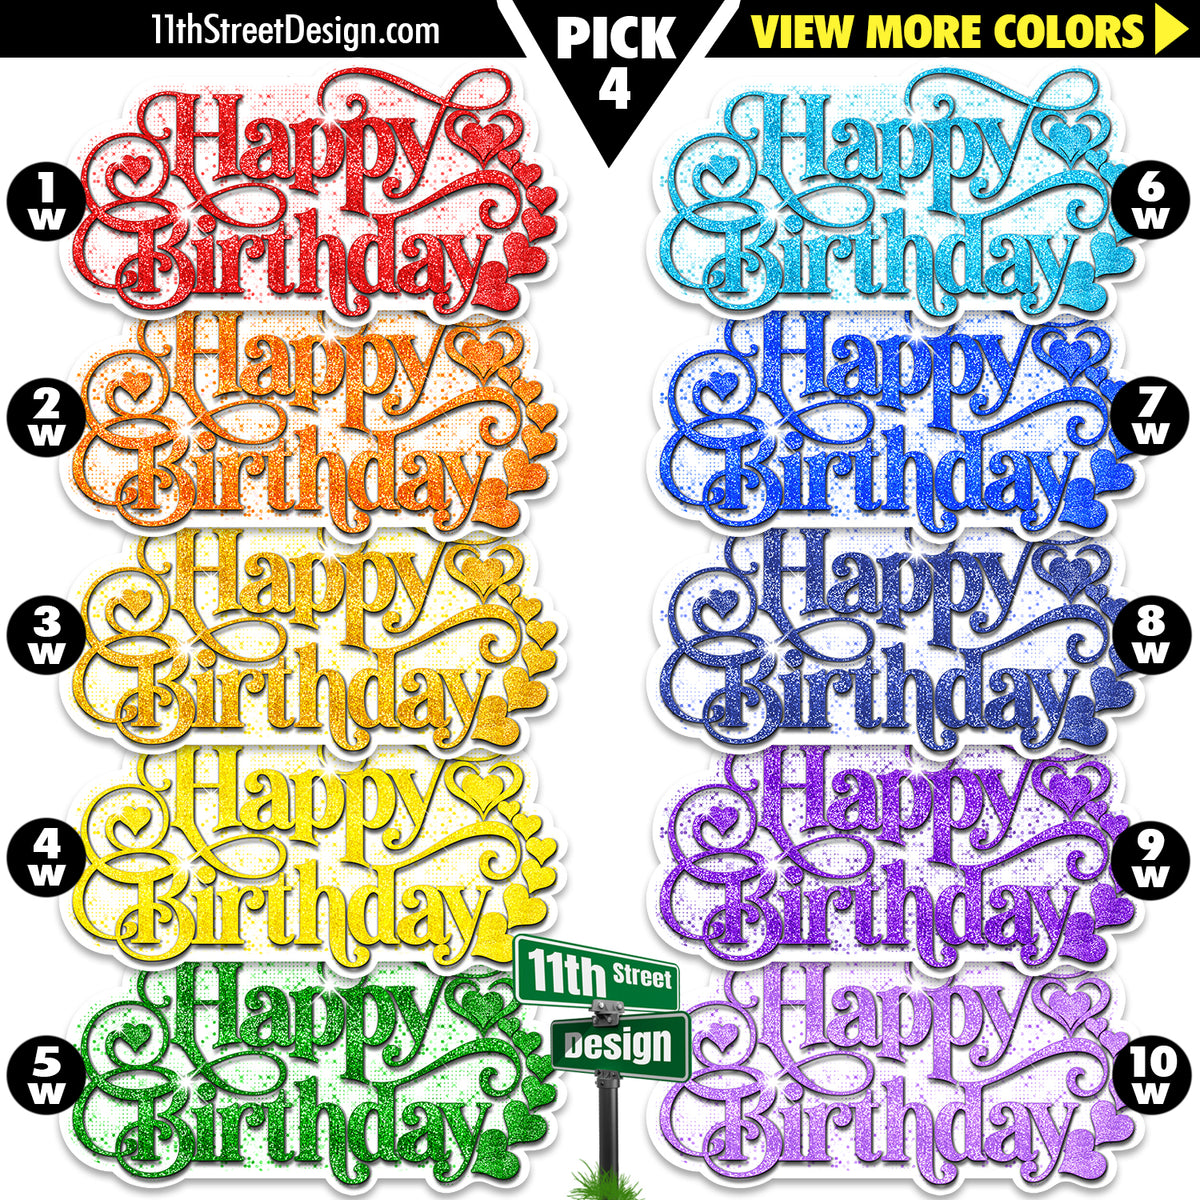 Hearts &amp; Swirls Happy Birthday Large Greeting Signs- Choose Your Colors!